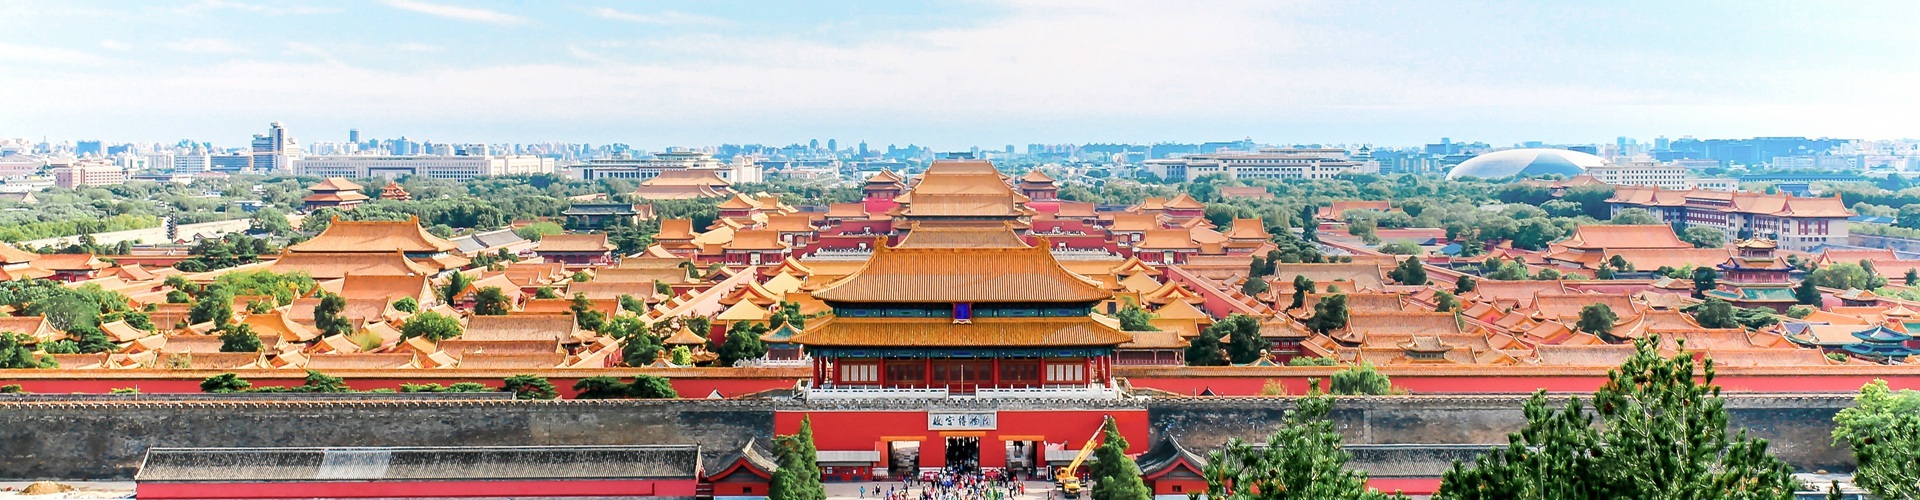 Top 10 Chinese Historic Sites Worth Visiting In China